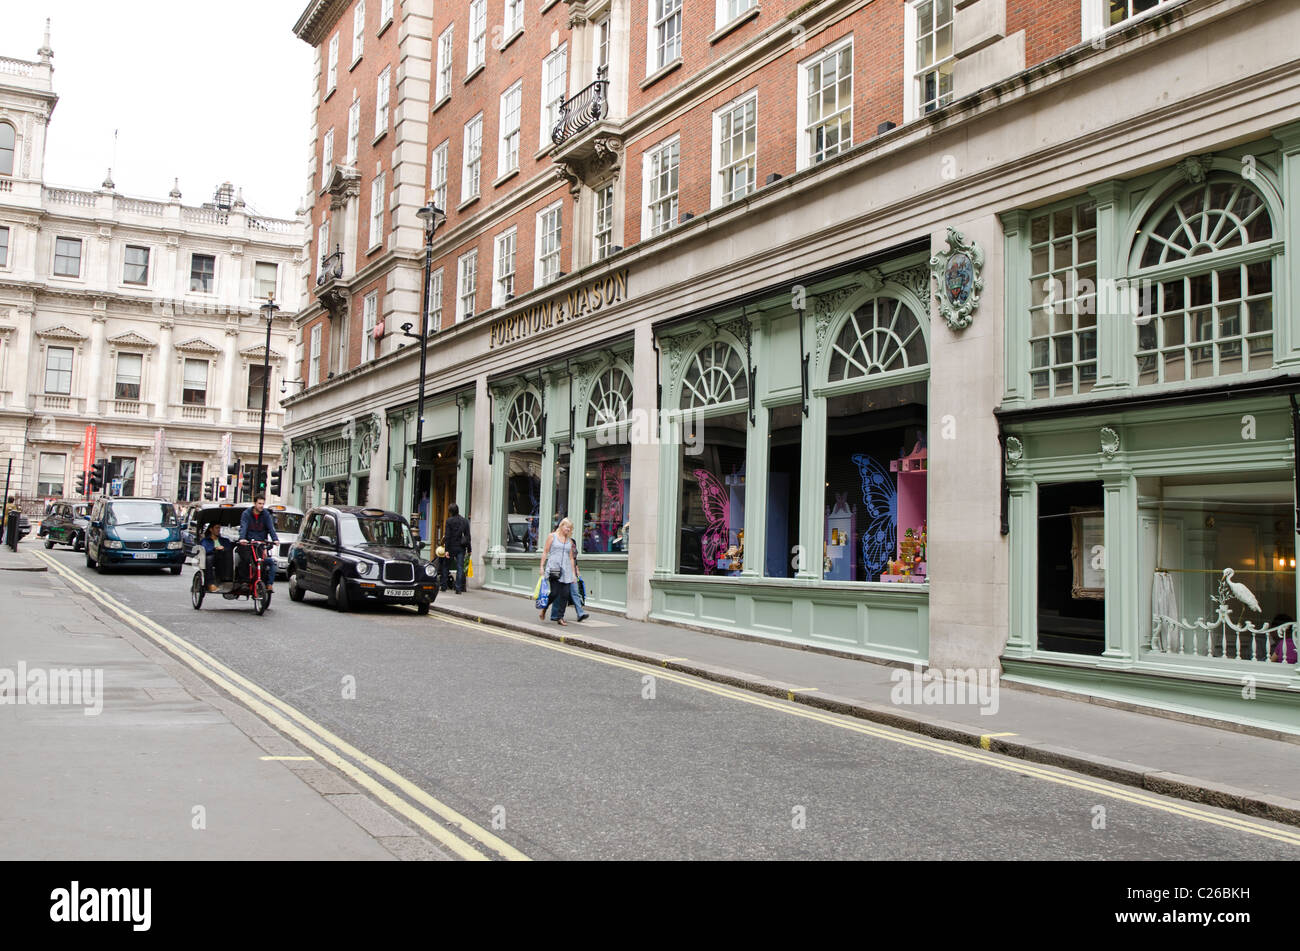 Duke Street Westminster High Resolution Stock Photography and Images - Alamy